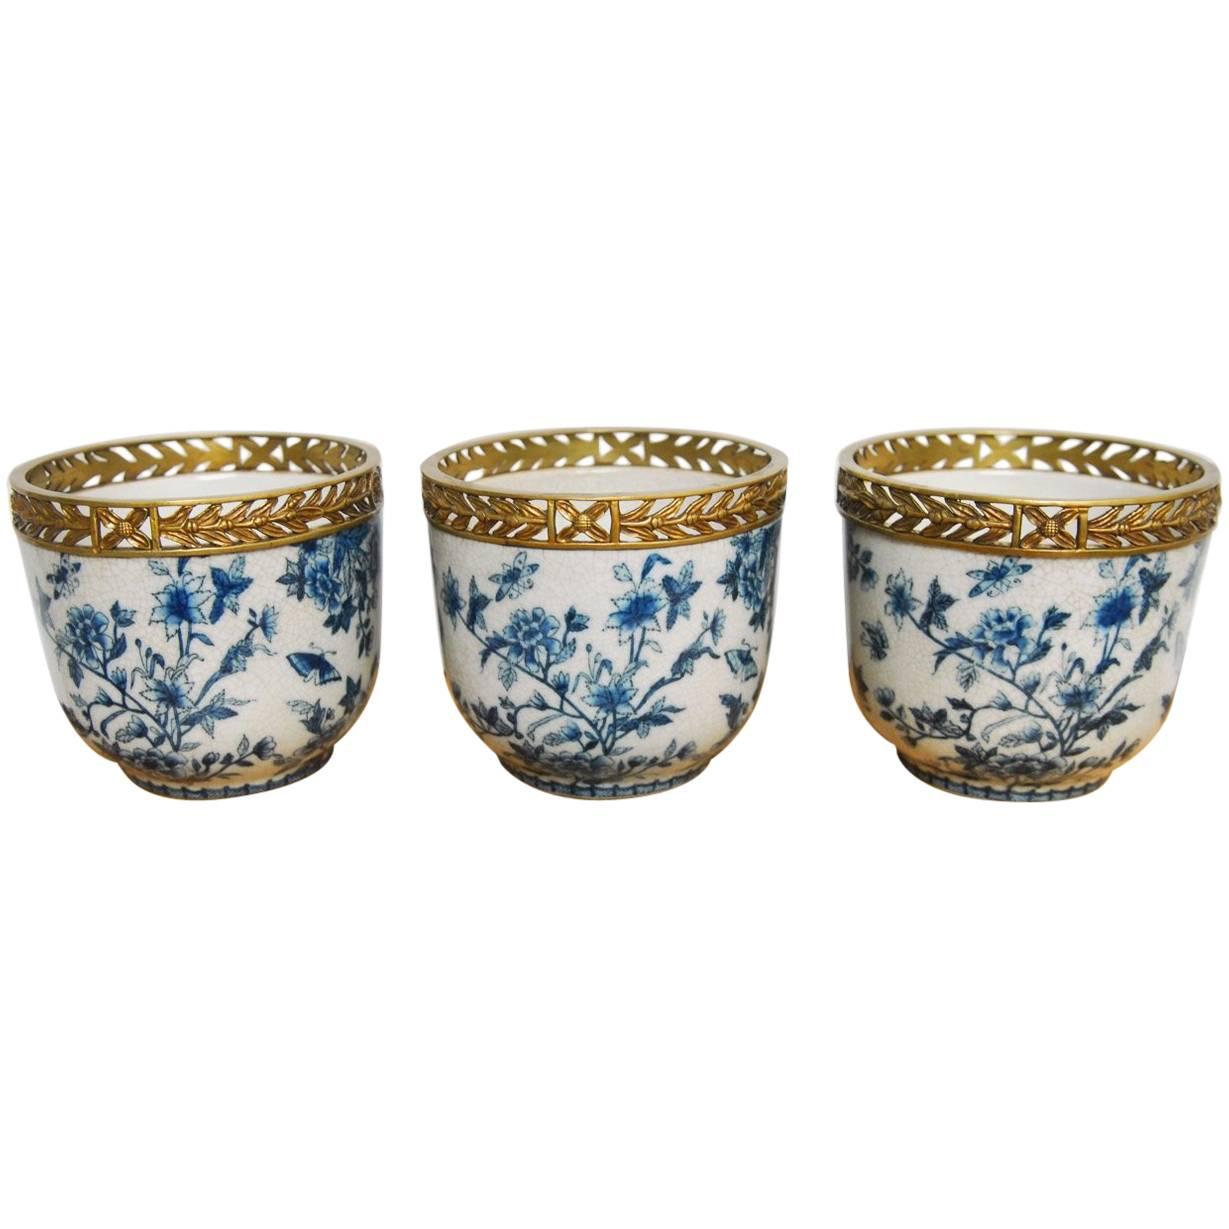 Set of Three Chinese Brass Mounted Blue and White Porcelain Urns